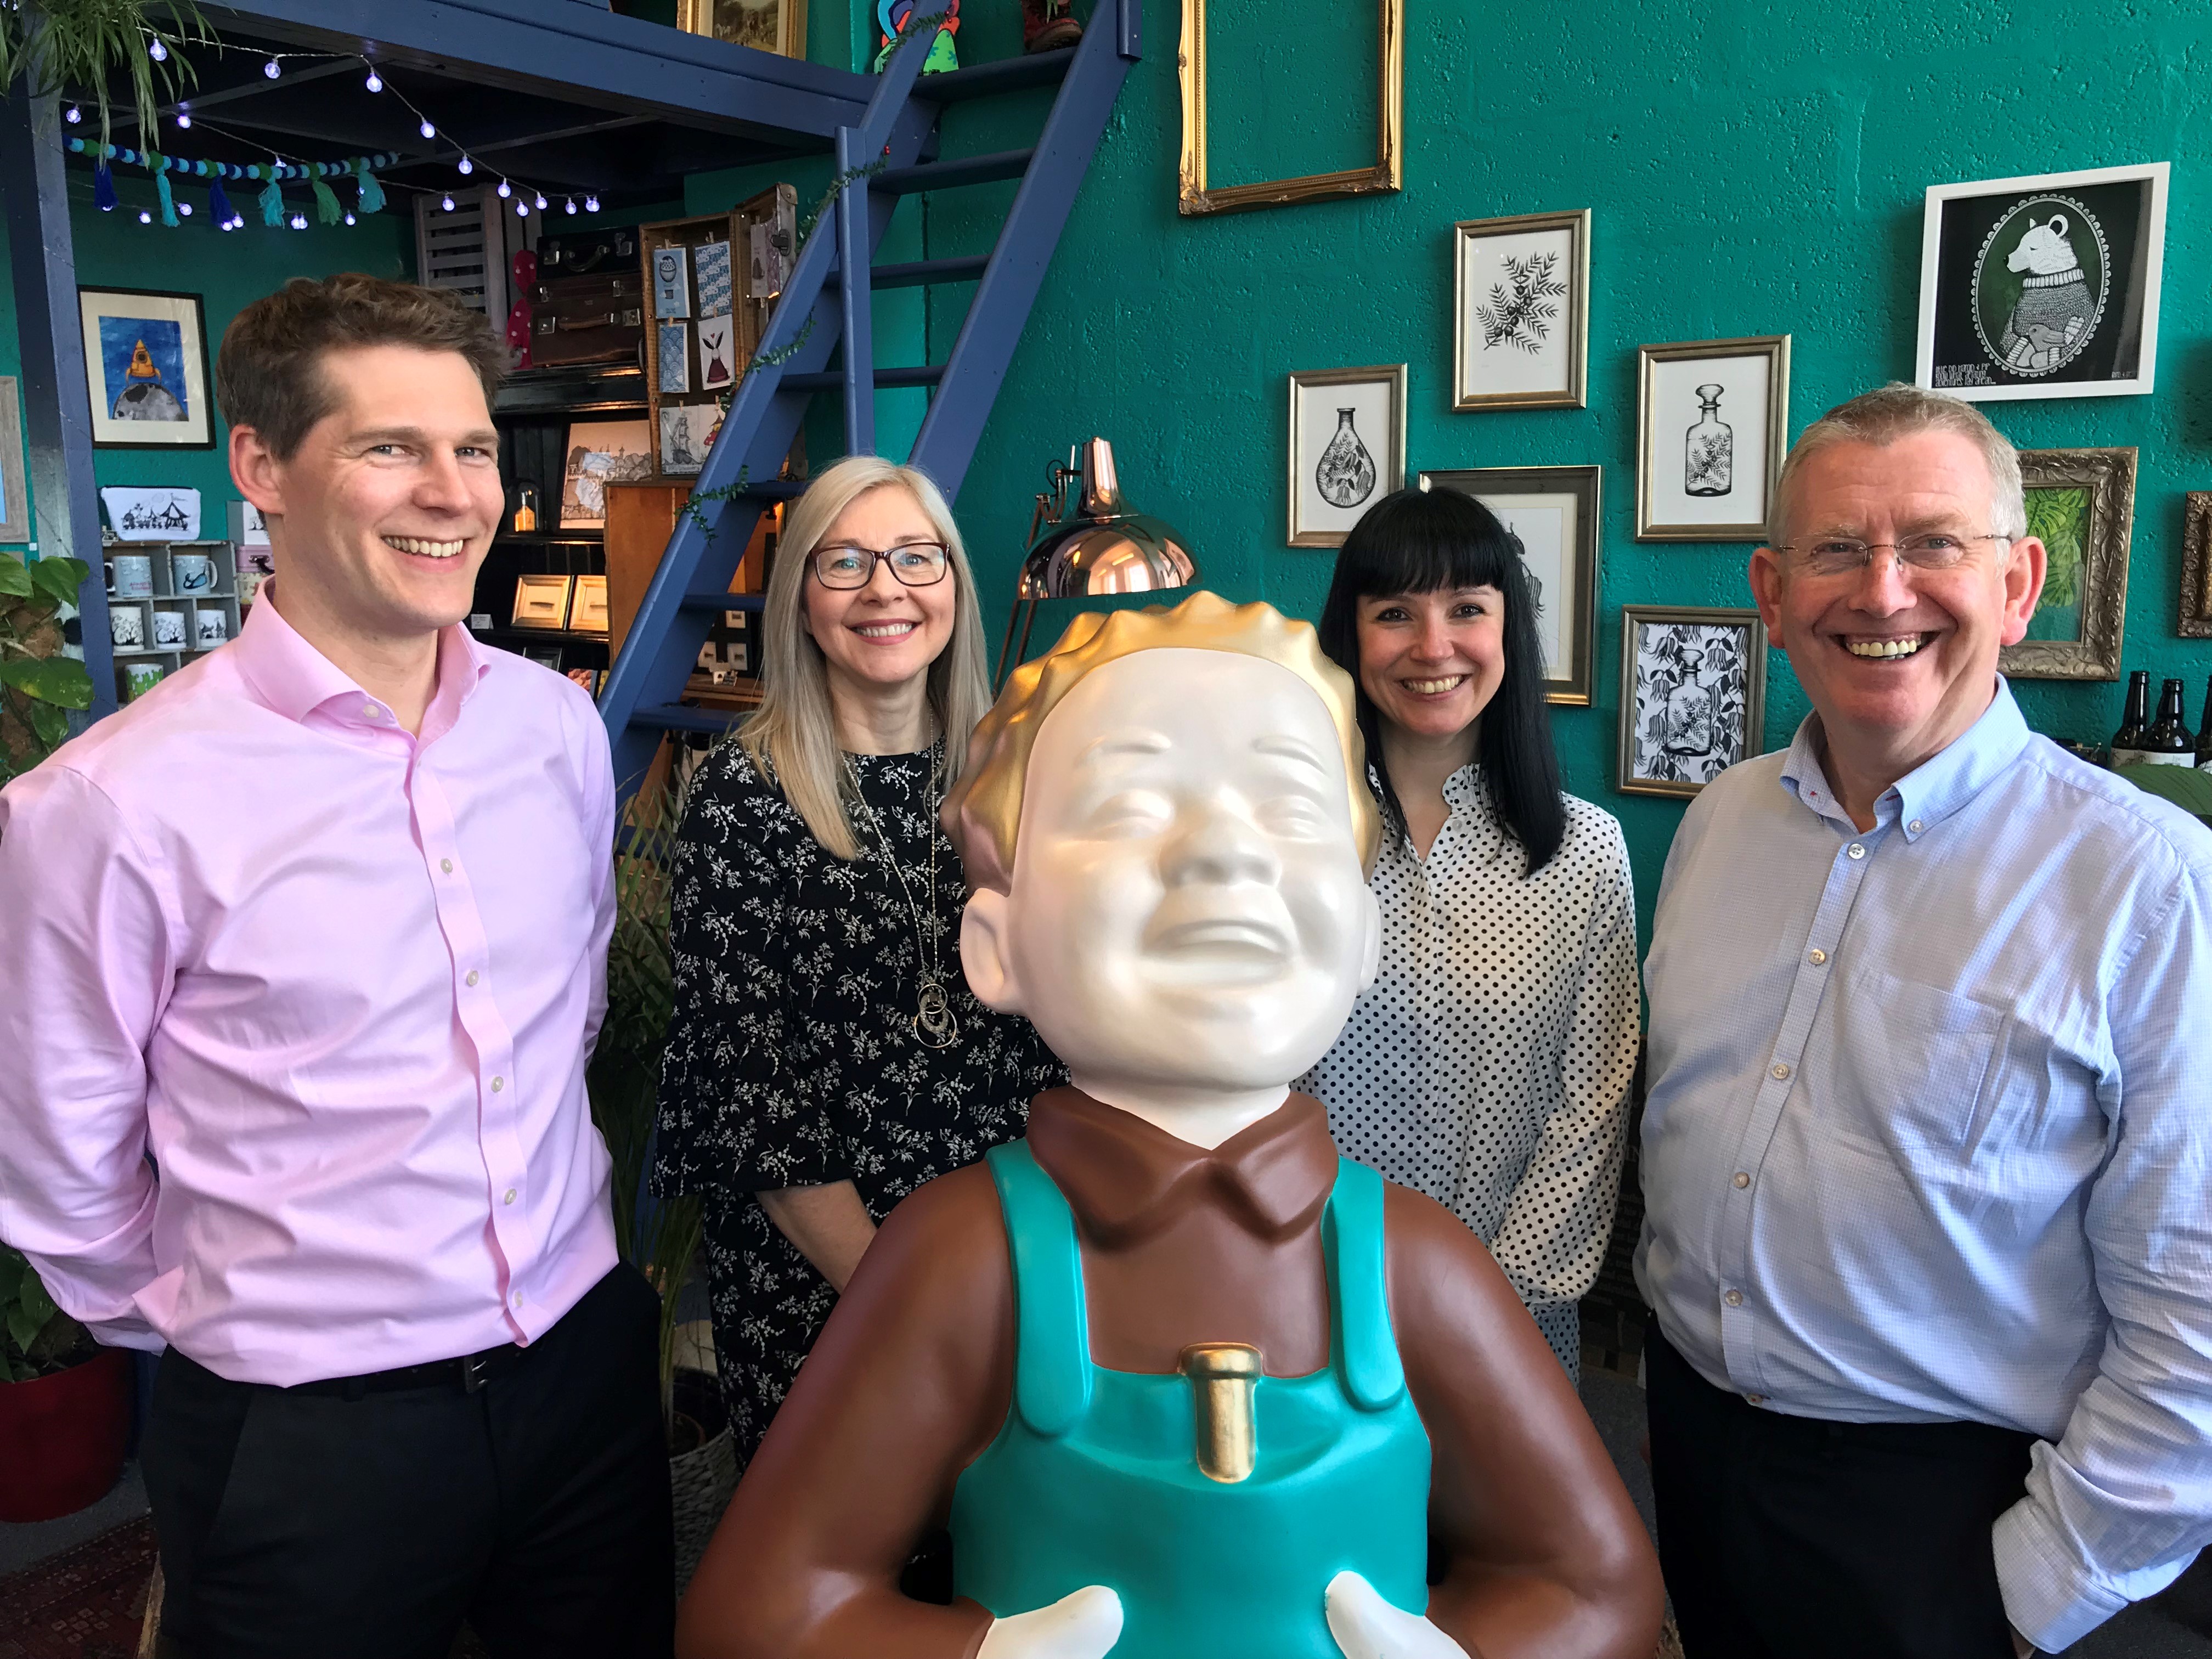 Suzanne Scott, second from right, in her studio alongside Aimers Tea & Coffee general manager Robert Sinclair, administration manager Arlene Lennie and managing director Eric Duncan.